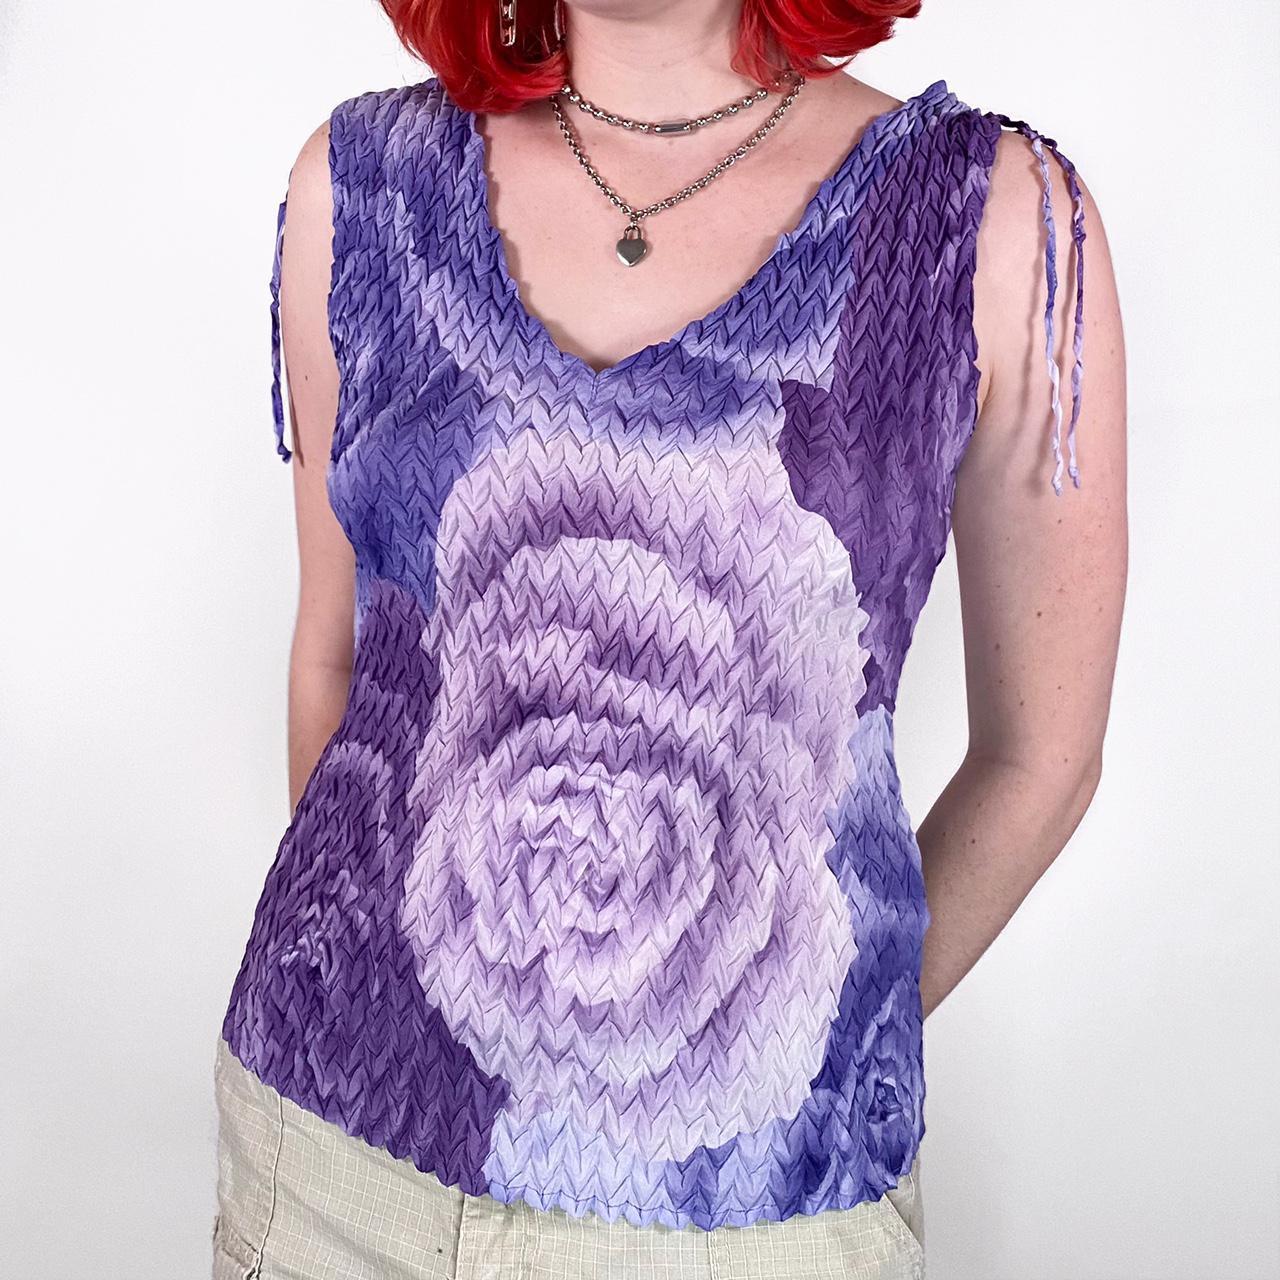 Product Image 2 - ♡ Textured rose graphic tank